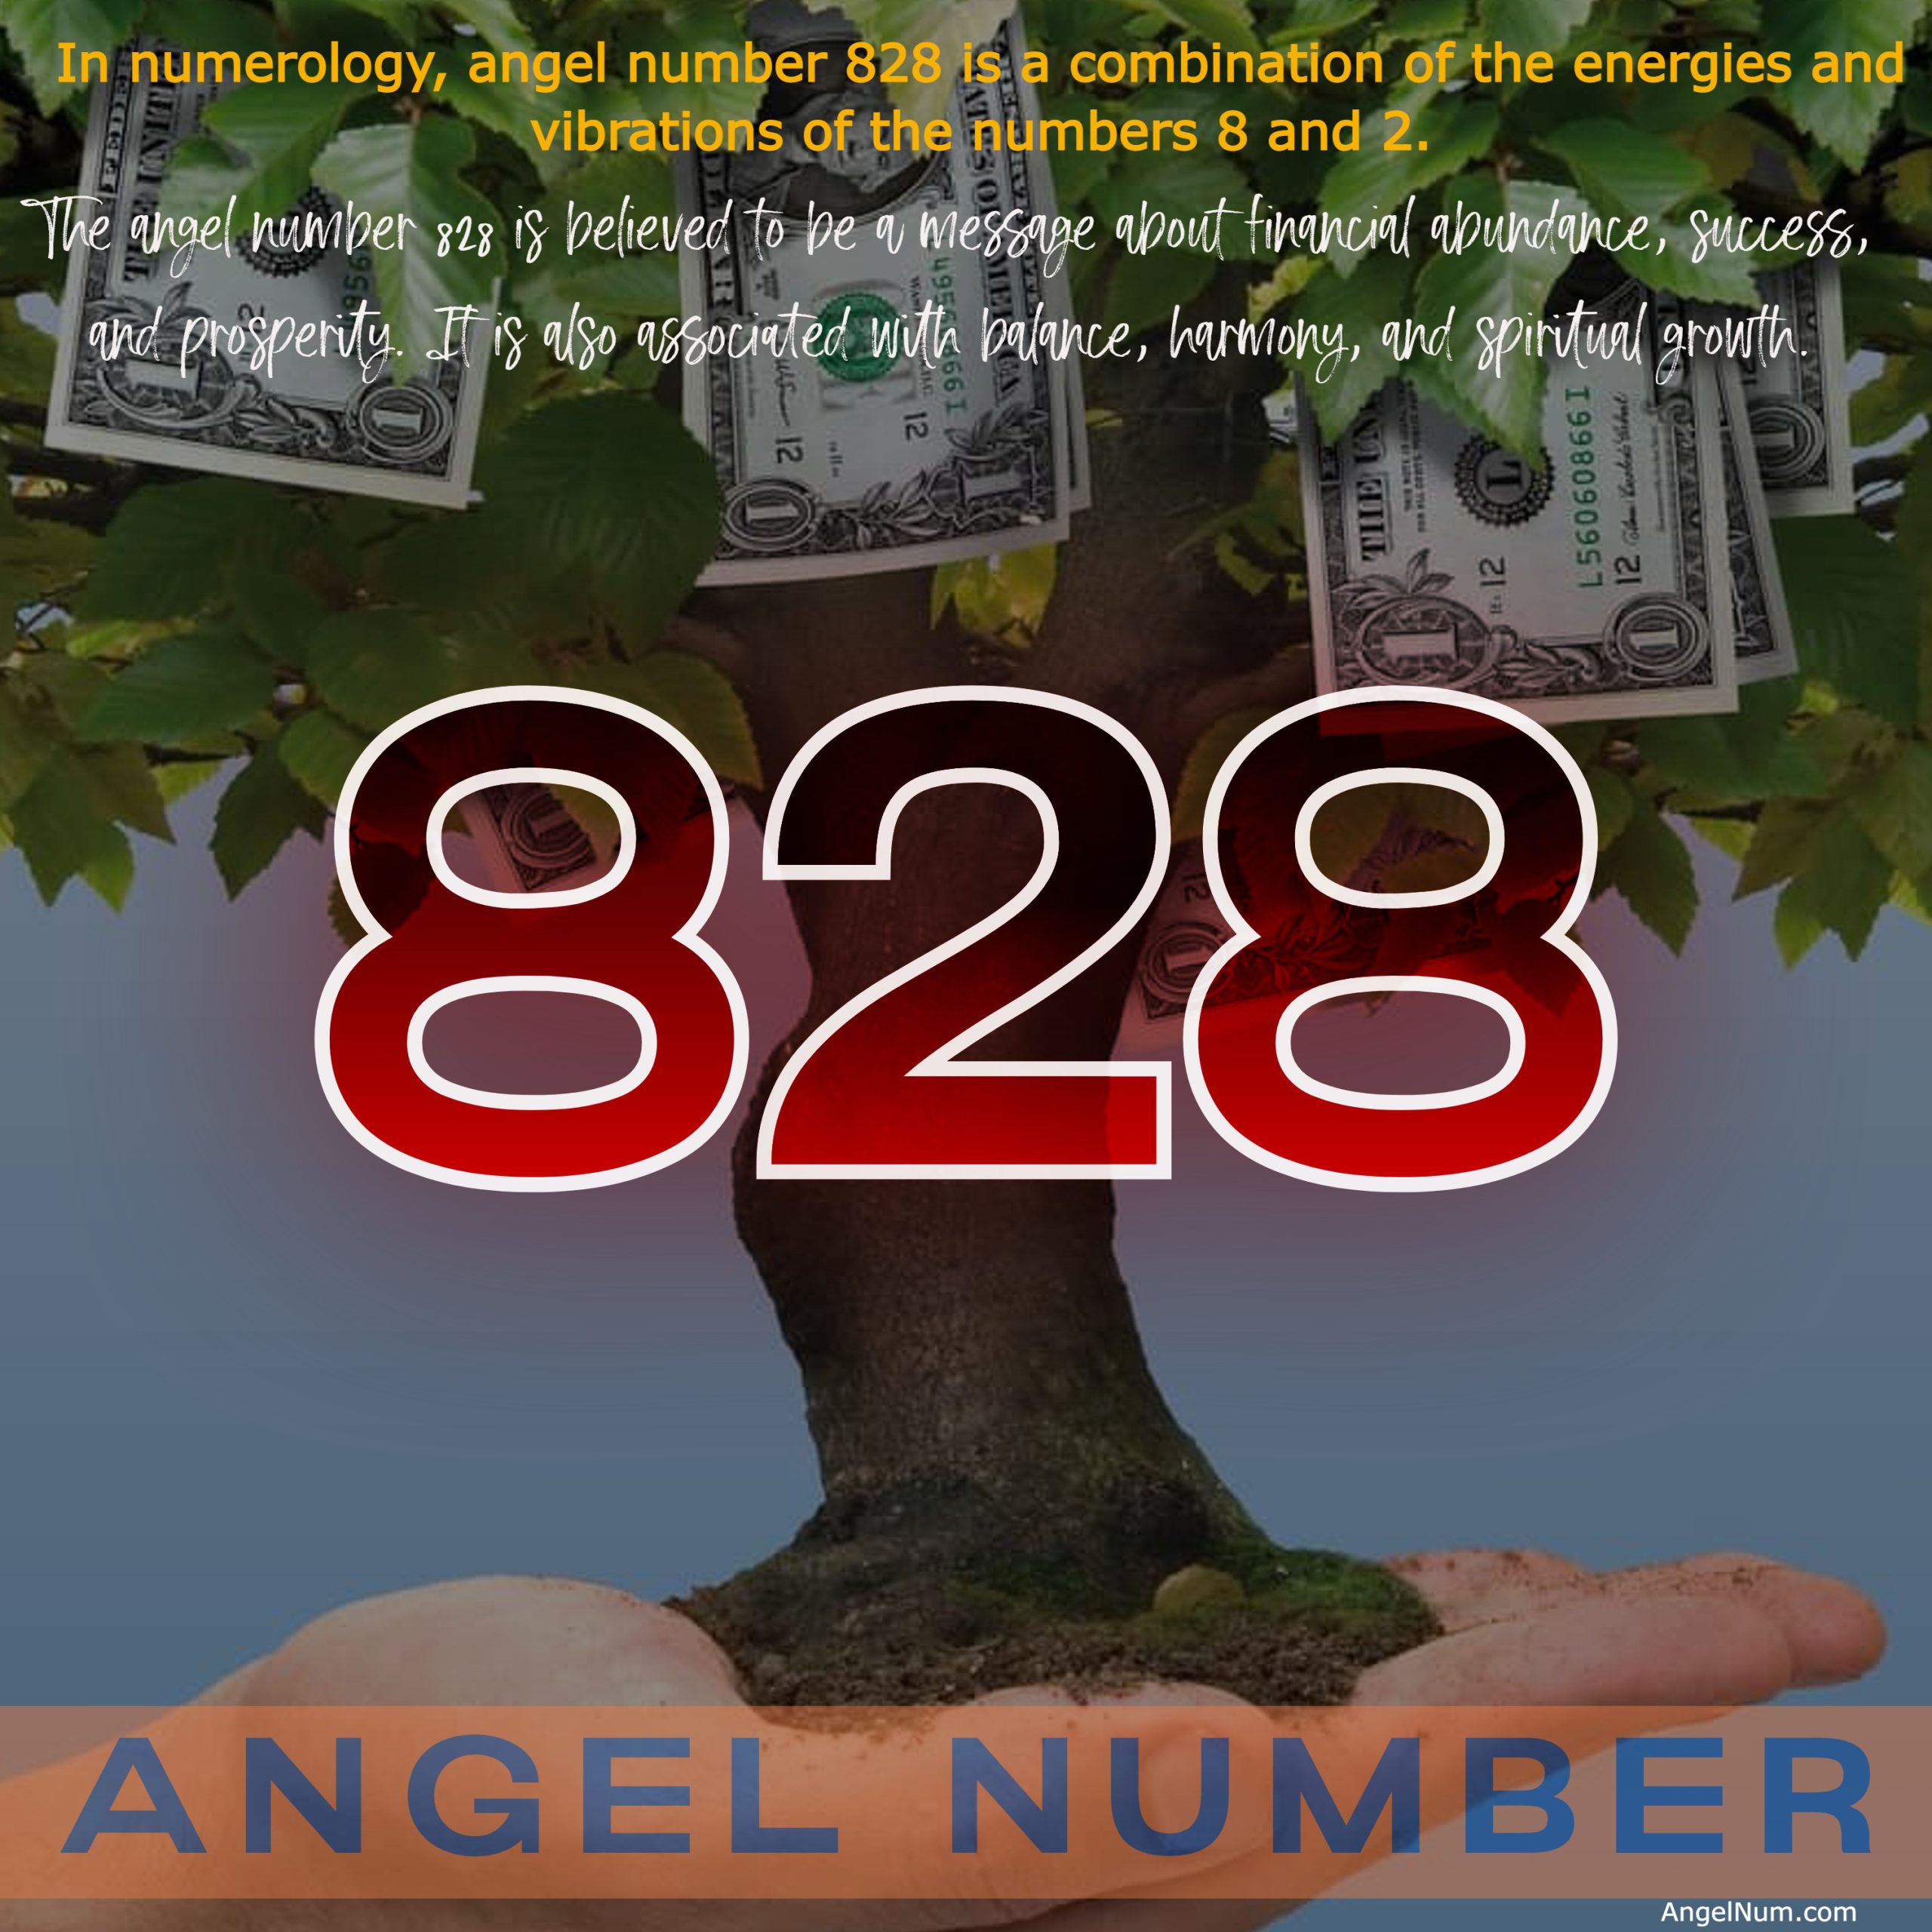 Angel Number 828: Meaning, Significance, and Interpretation